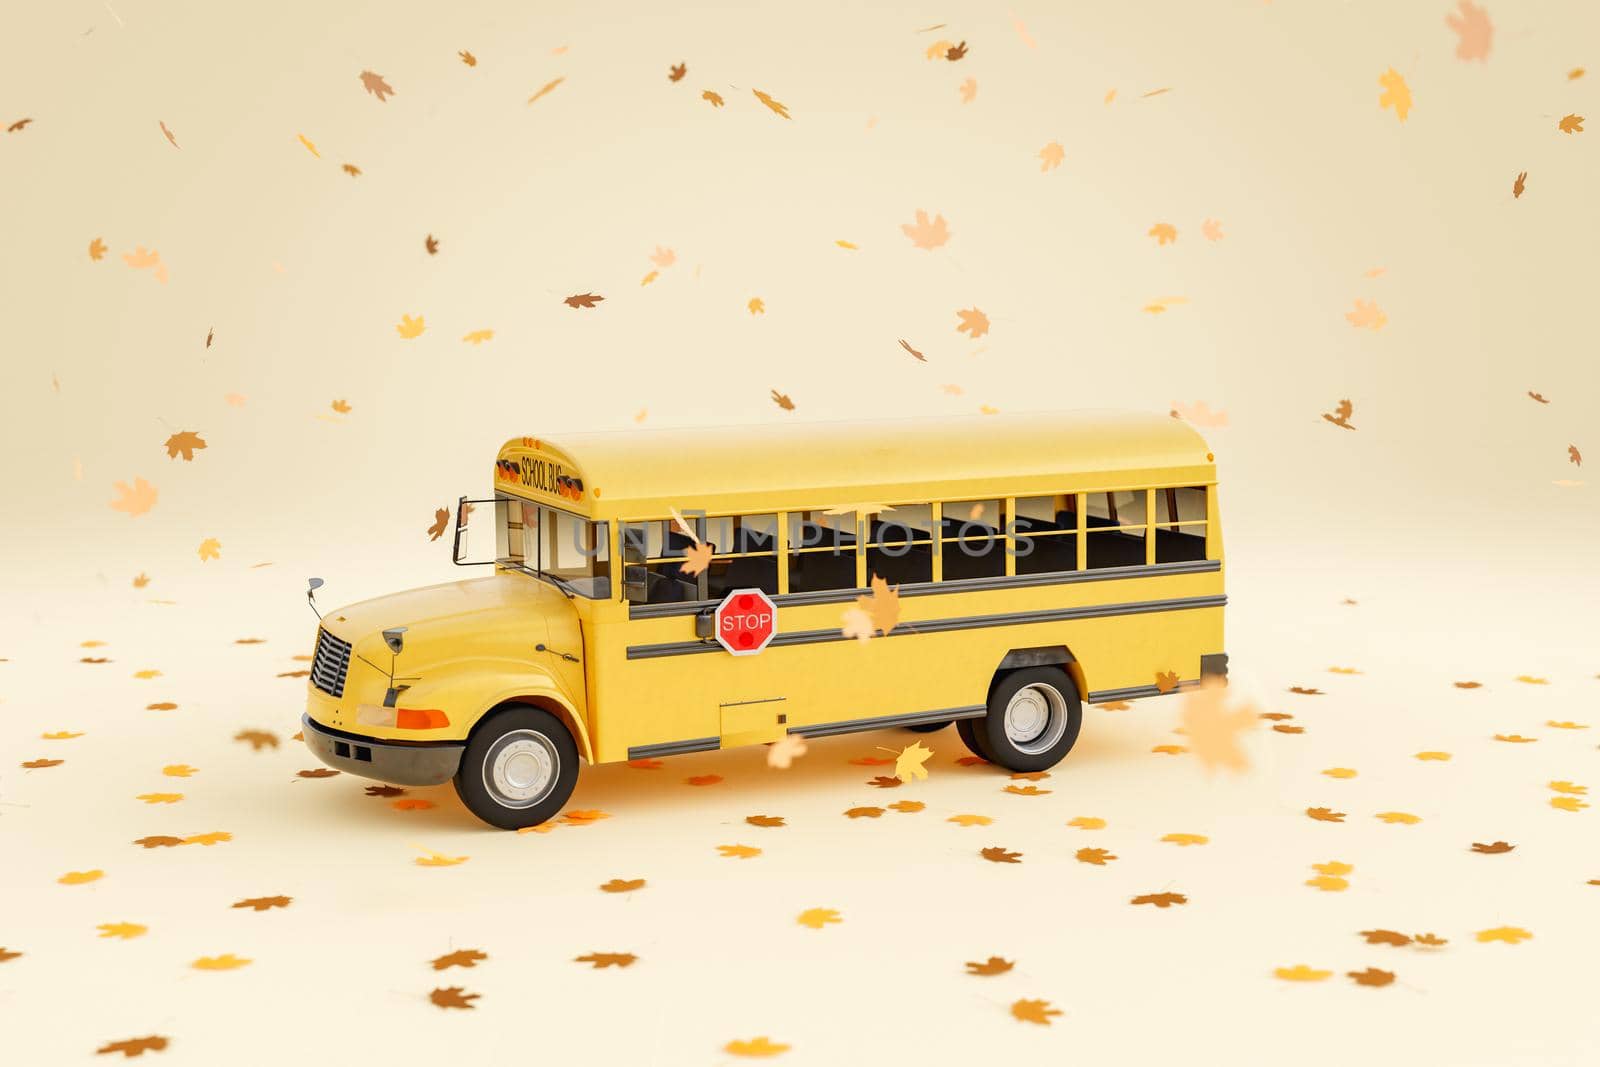 school bus under falling autumn leaves against beige background by asolano